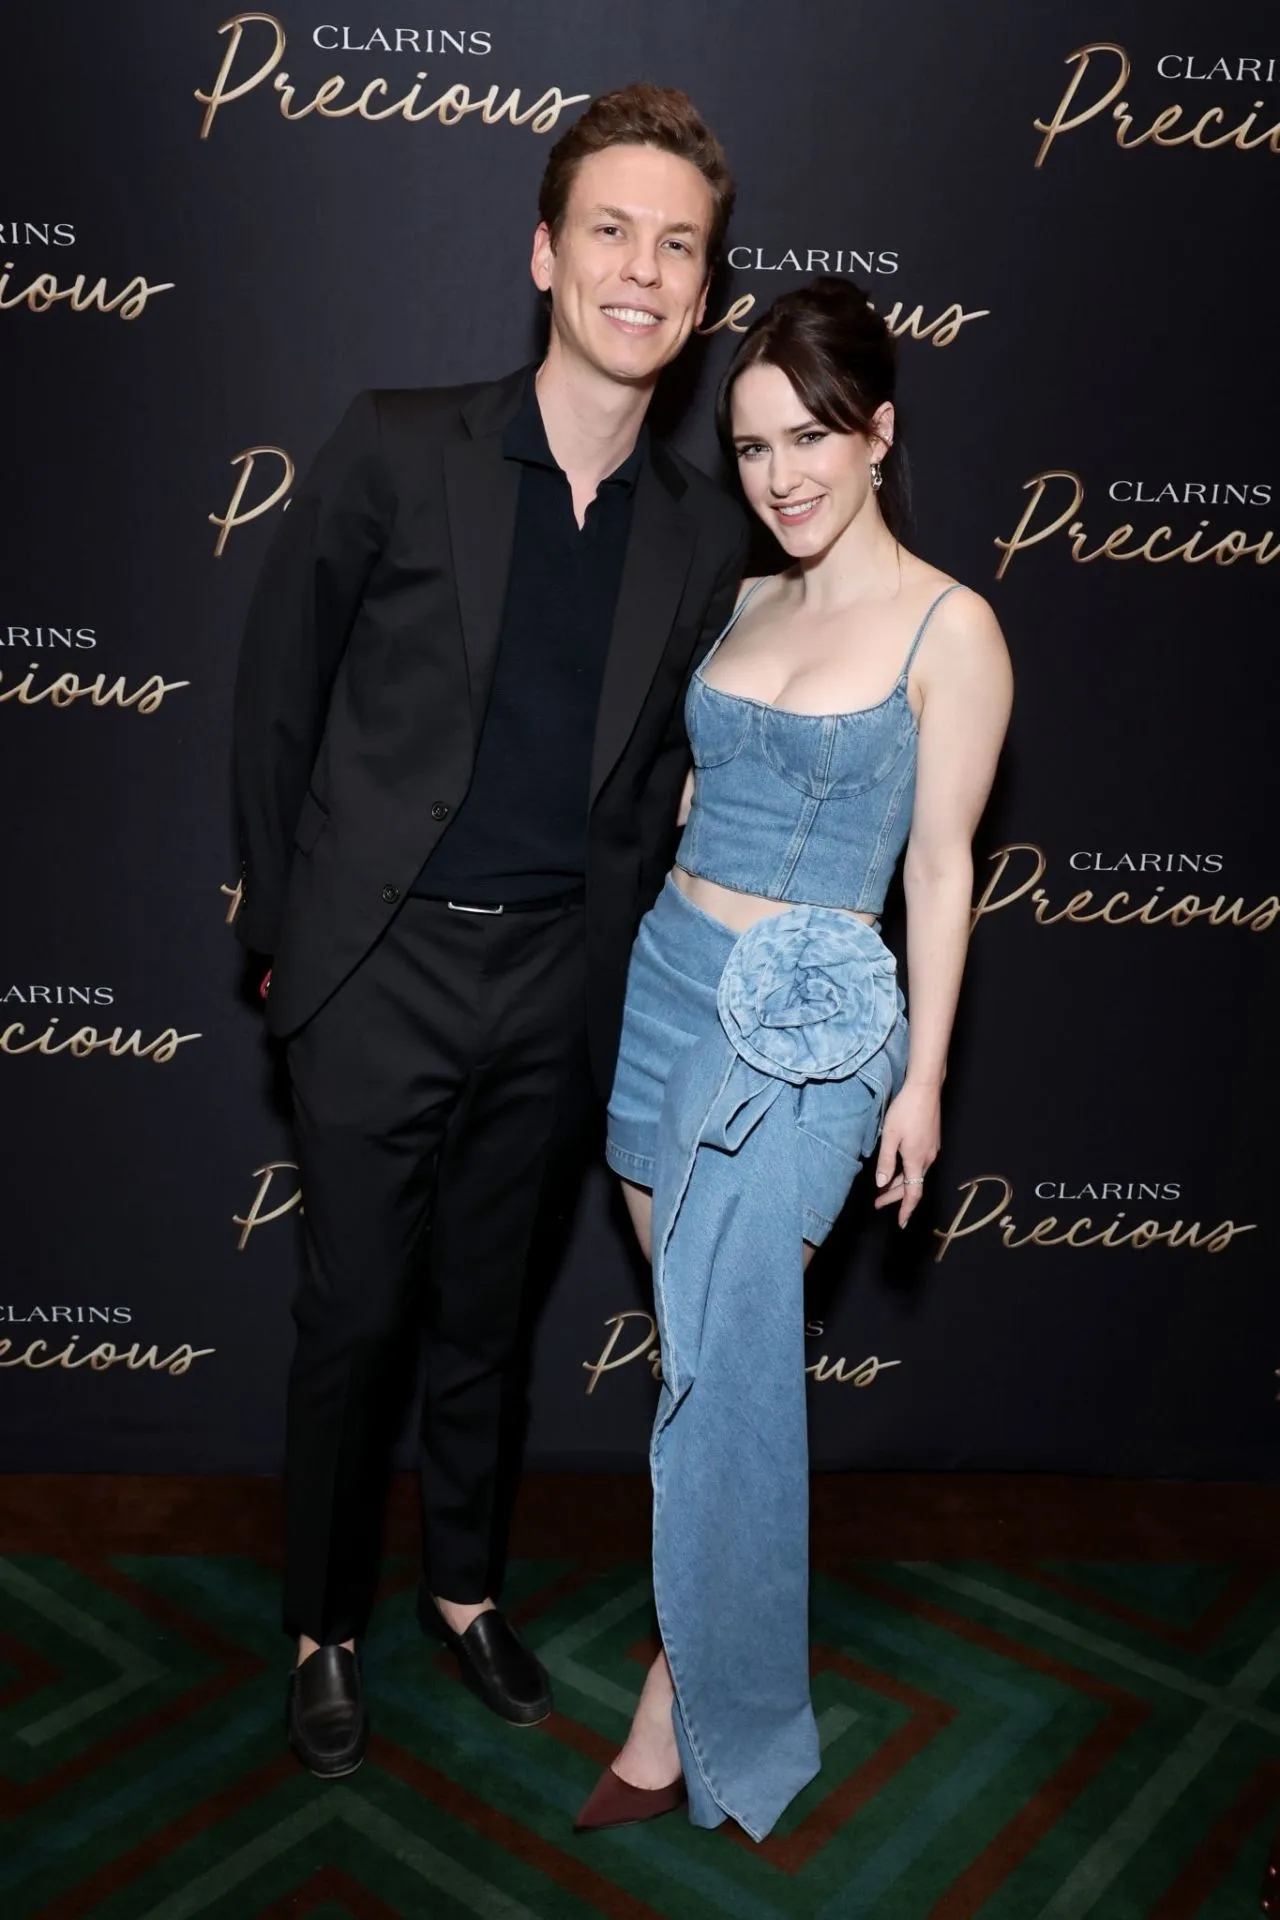 RACHEL BROSNAHAN AT CLARINS PRECIOUS INTIMATE DINNER EVENT IN NEW YORK3